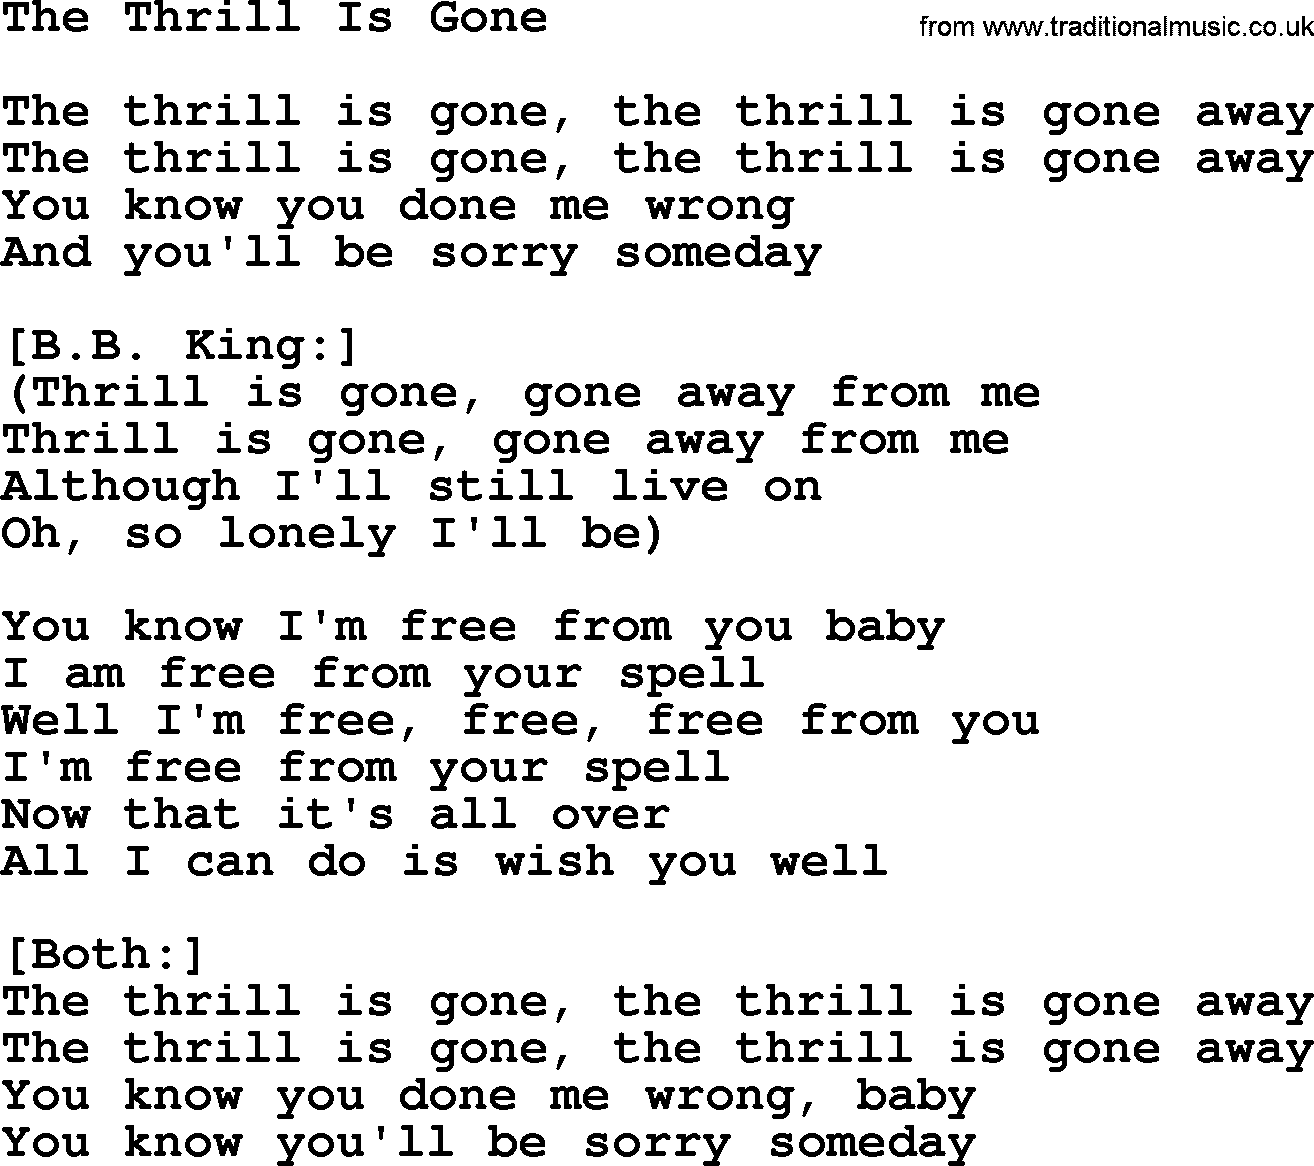 Willie Nelson song: The Thrill Is Gone lyrics